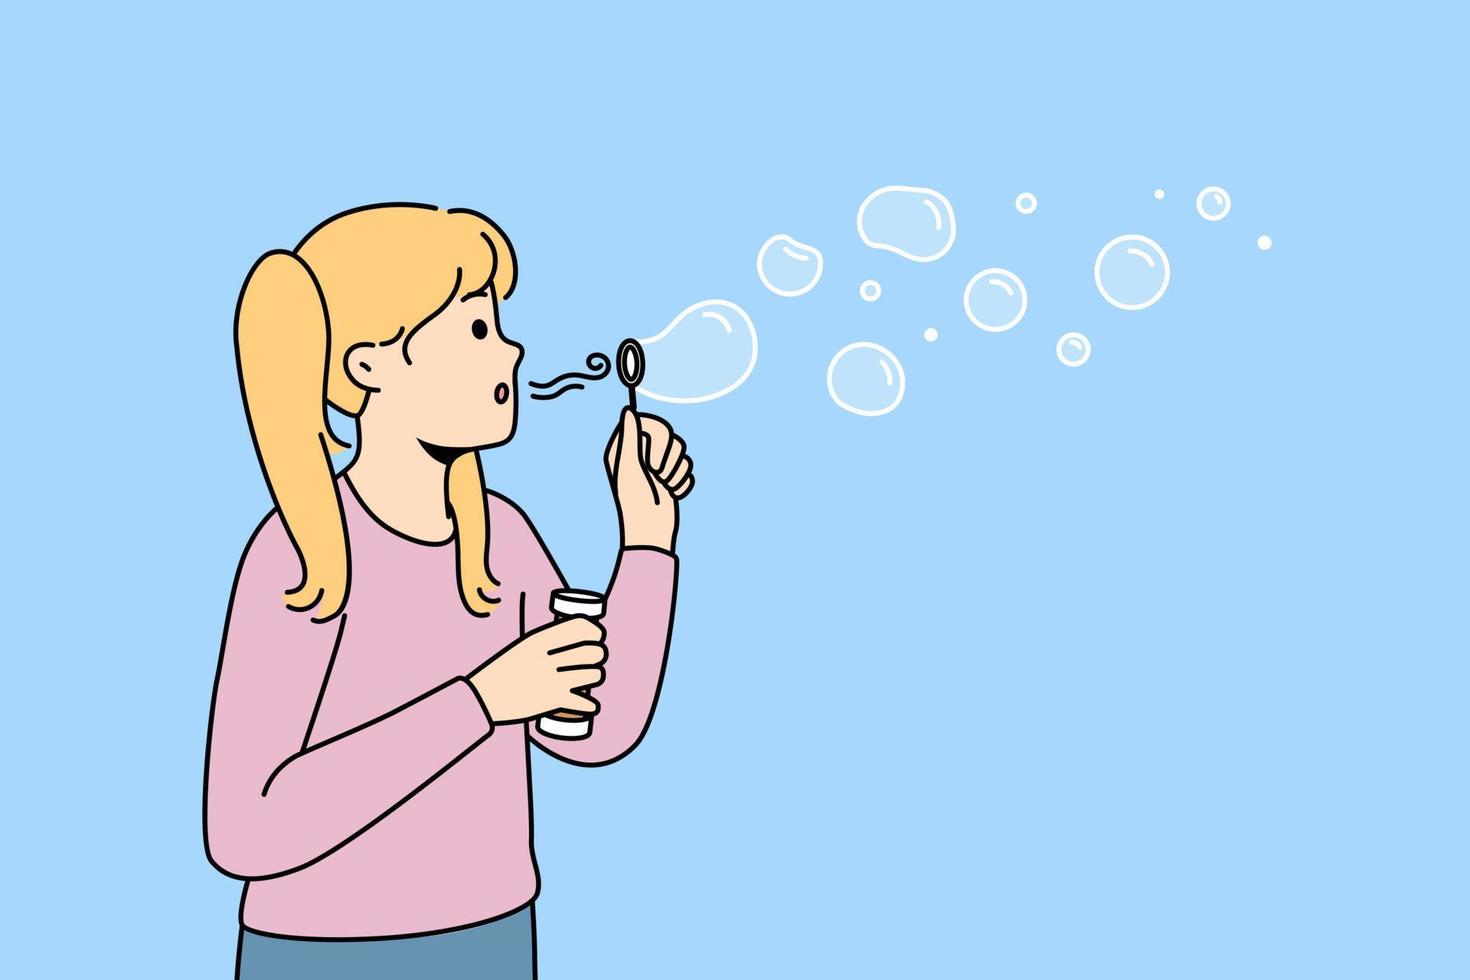 Happy girl child have fun blowing soap bubbles. Smiling kid blow soapsuds. Childhood game activity outdoors. Vector illustration.